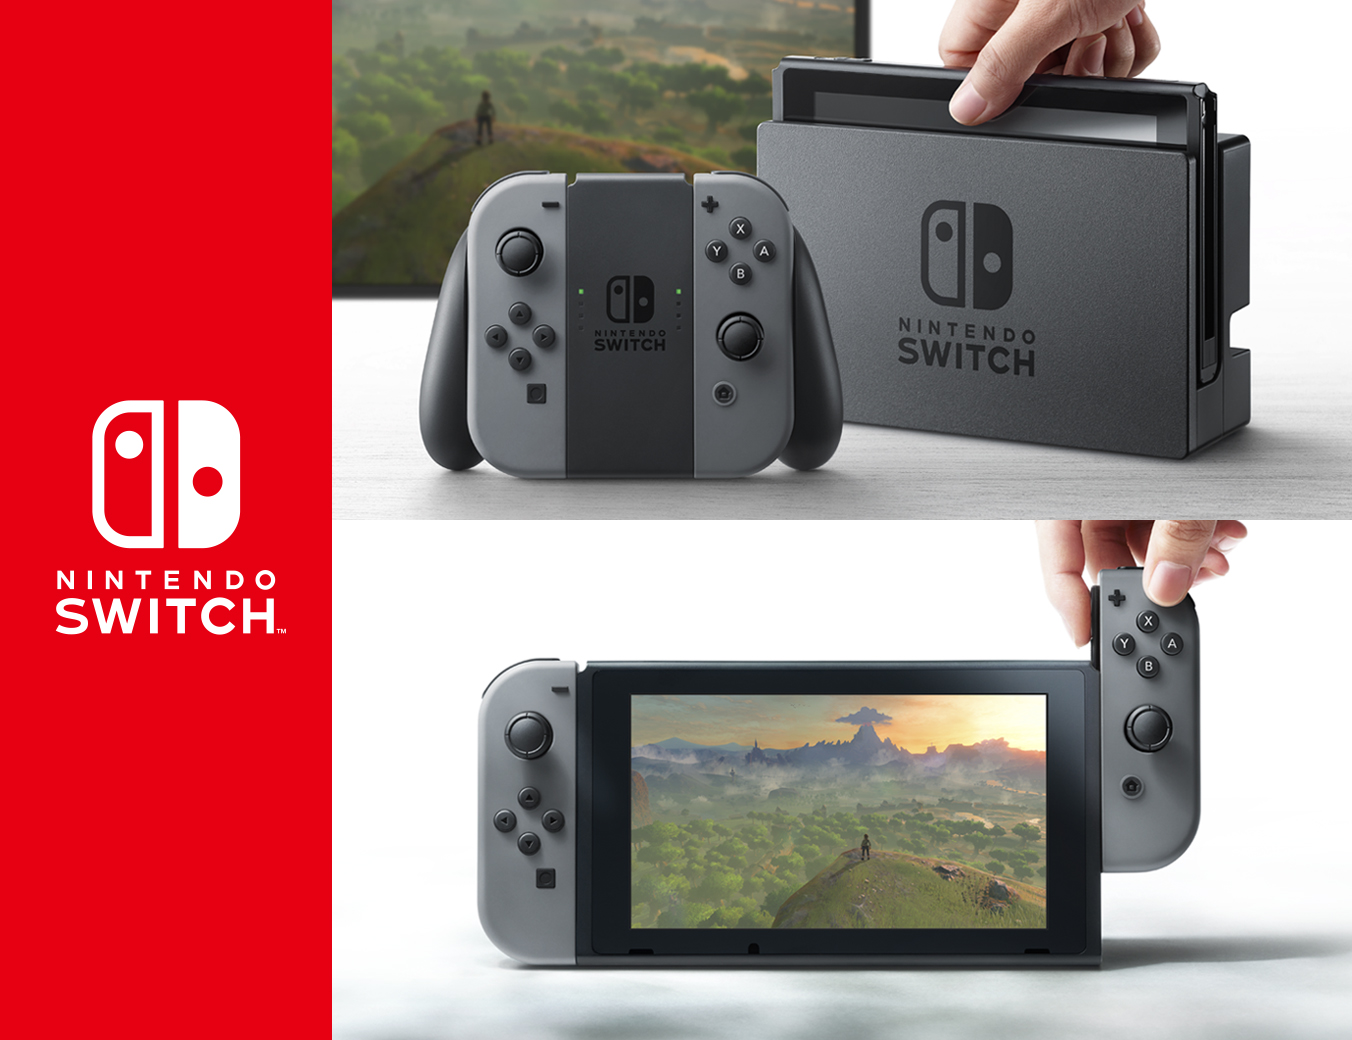 Amazon, Hulu and Netflix will come to the Nintendo Switch in due time